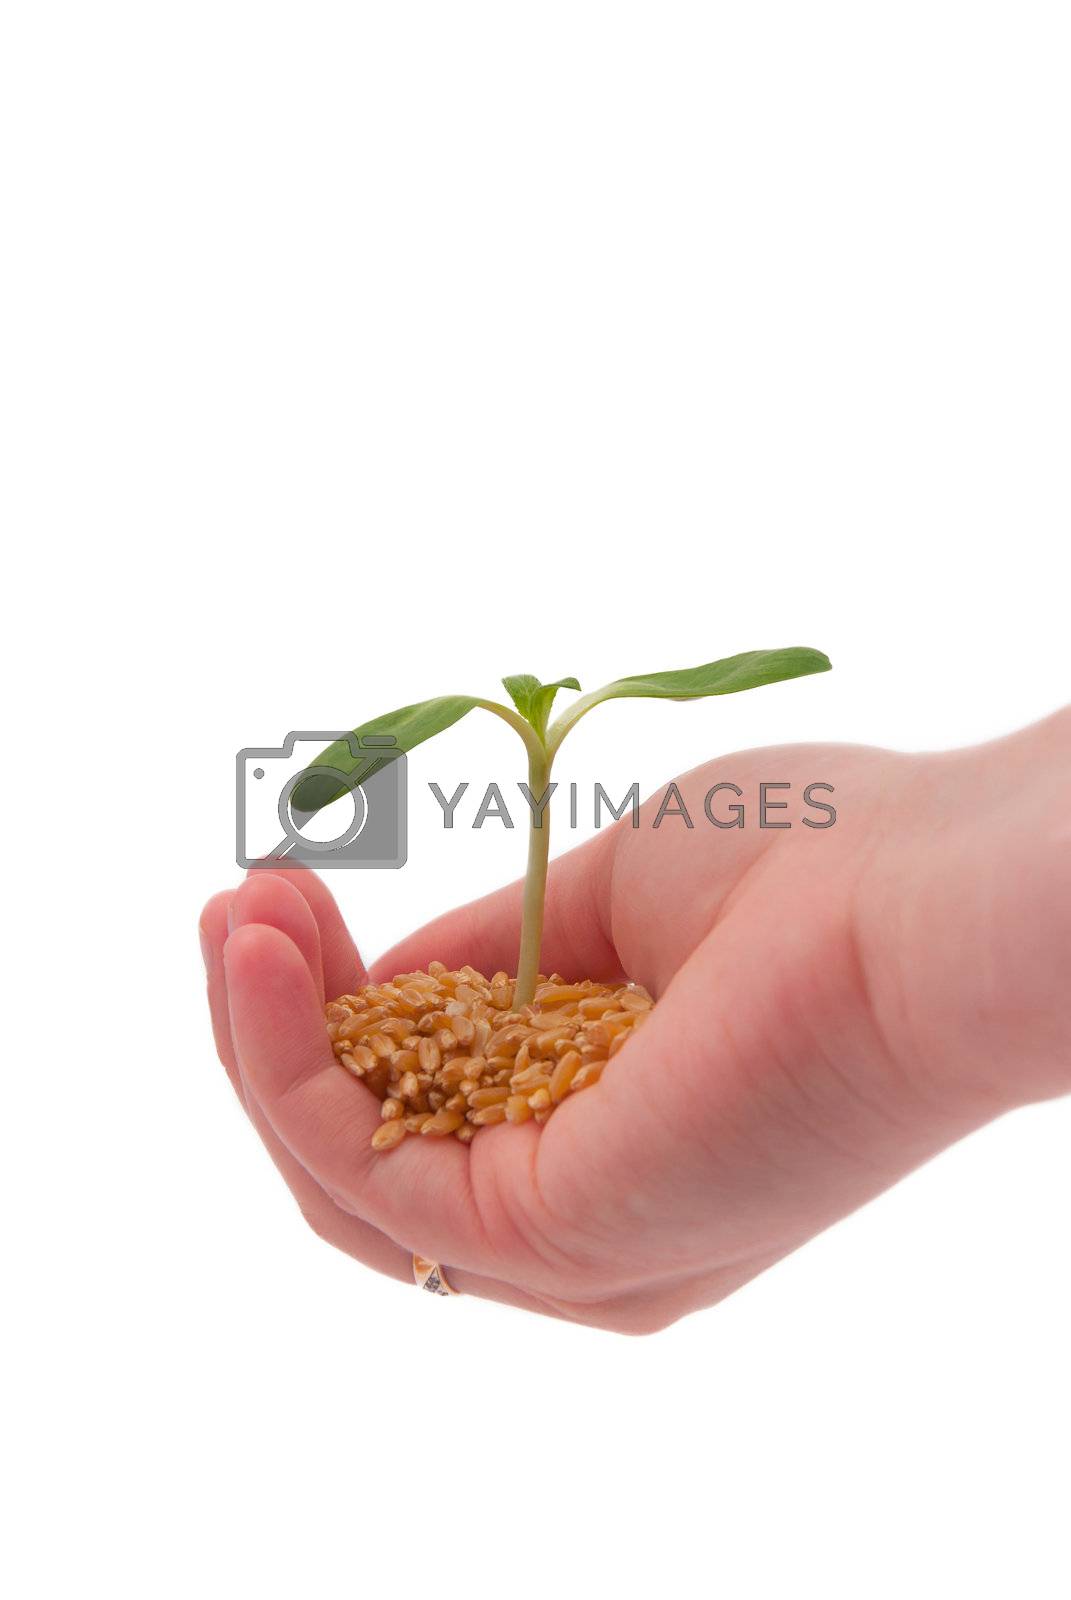 Royalty free image of Young sprout in the hand by firewings